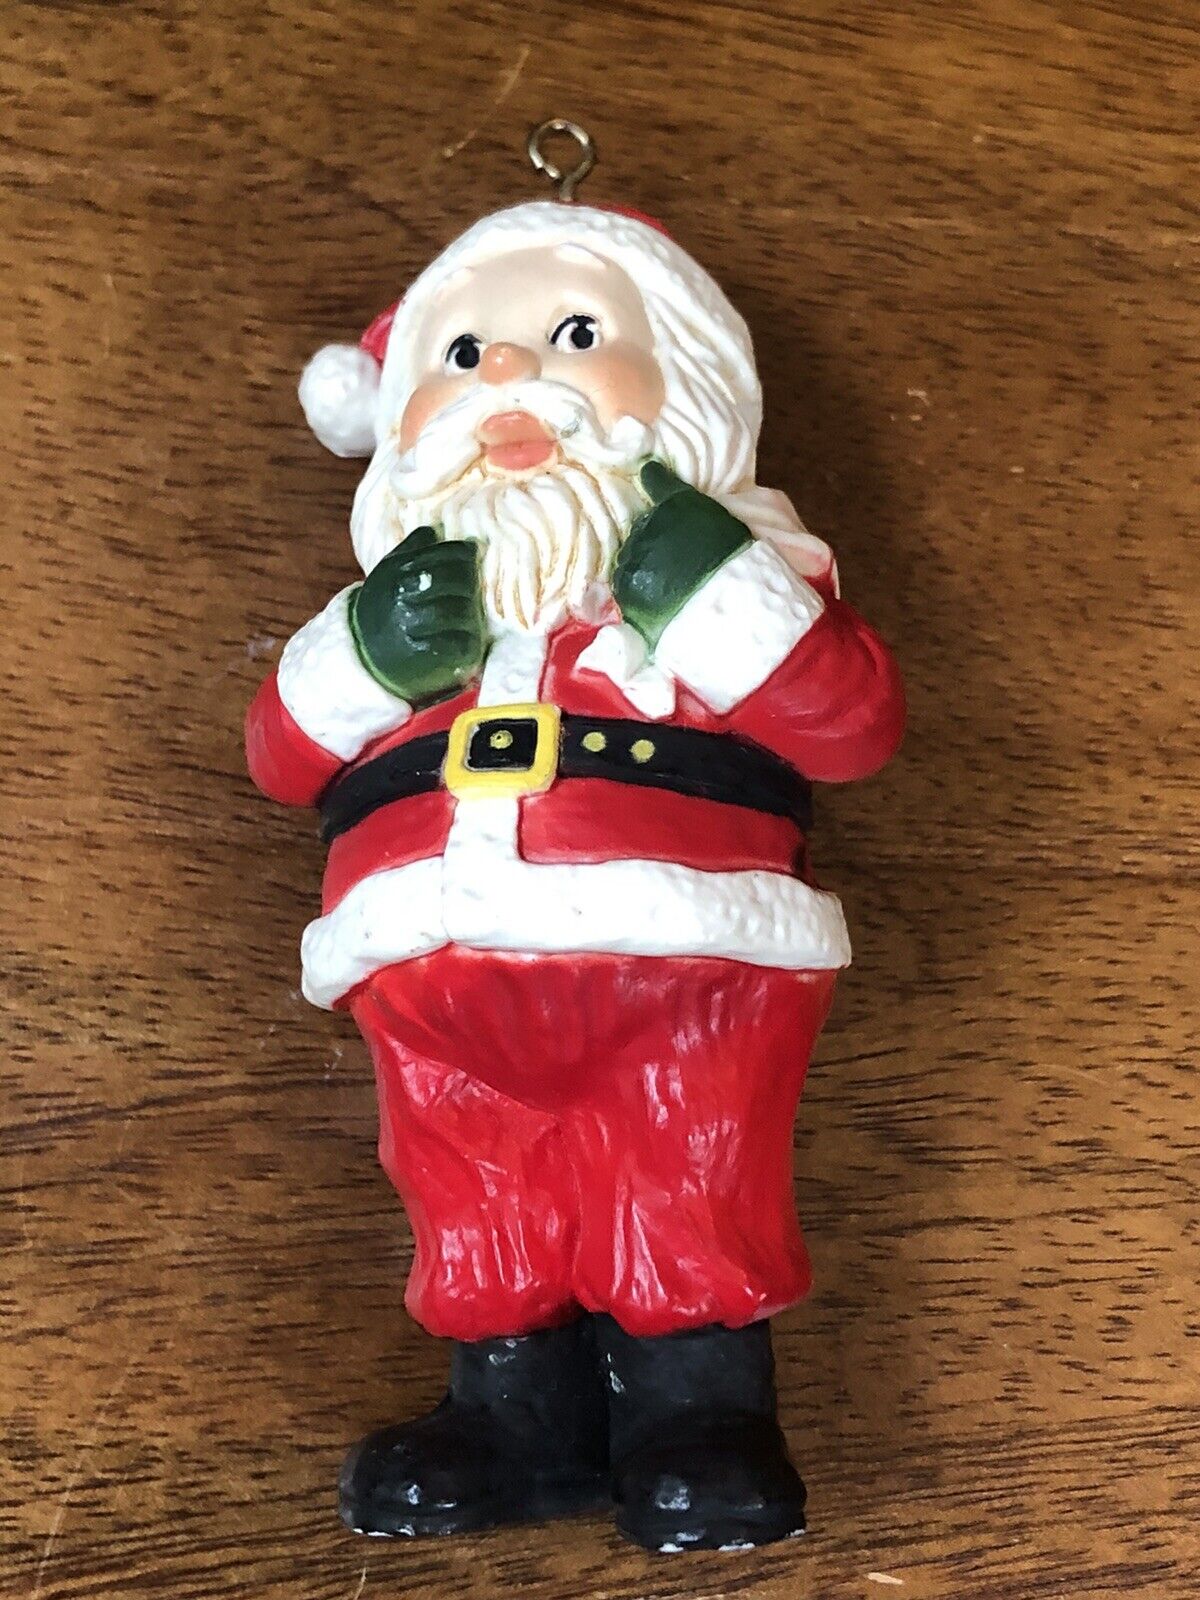 Vintage Santa Claus Christmas Figurine Red White Green Hanging Ornament